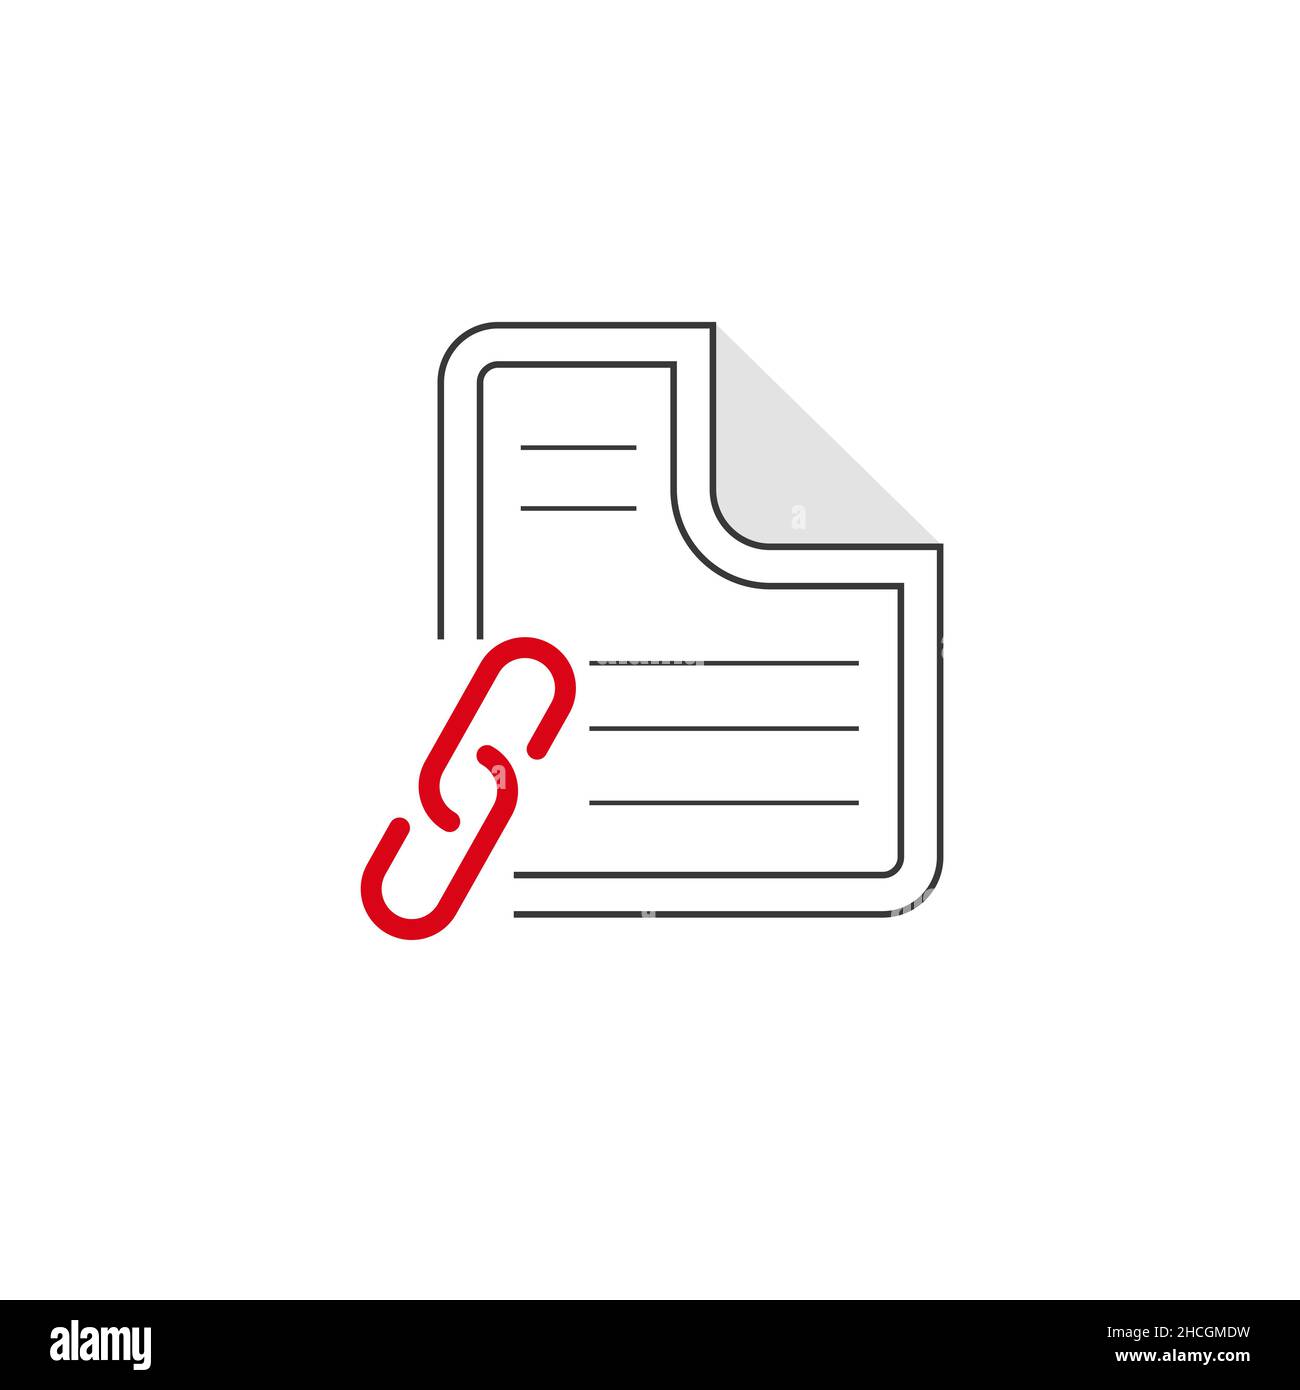 Copy link files line art vector icon. Stock Vector illustration isolated on white background. Stock Vector